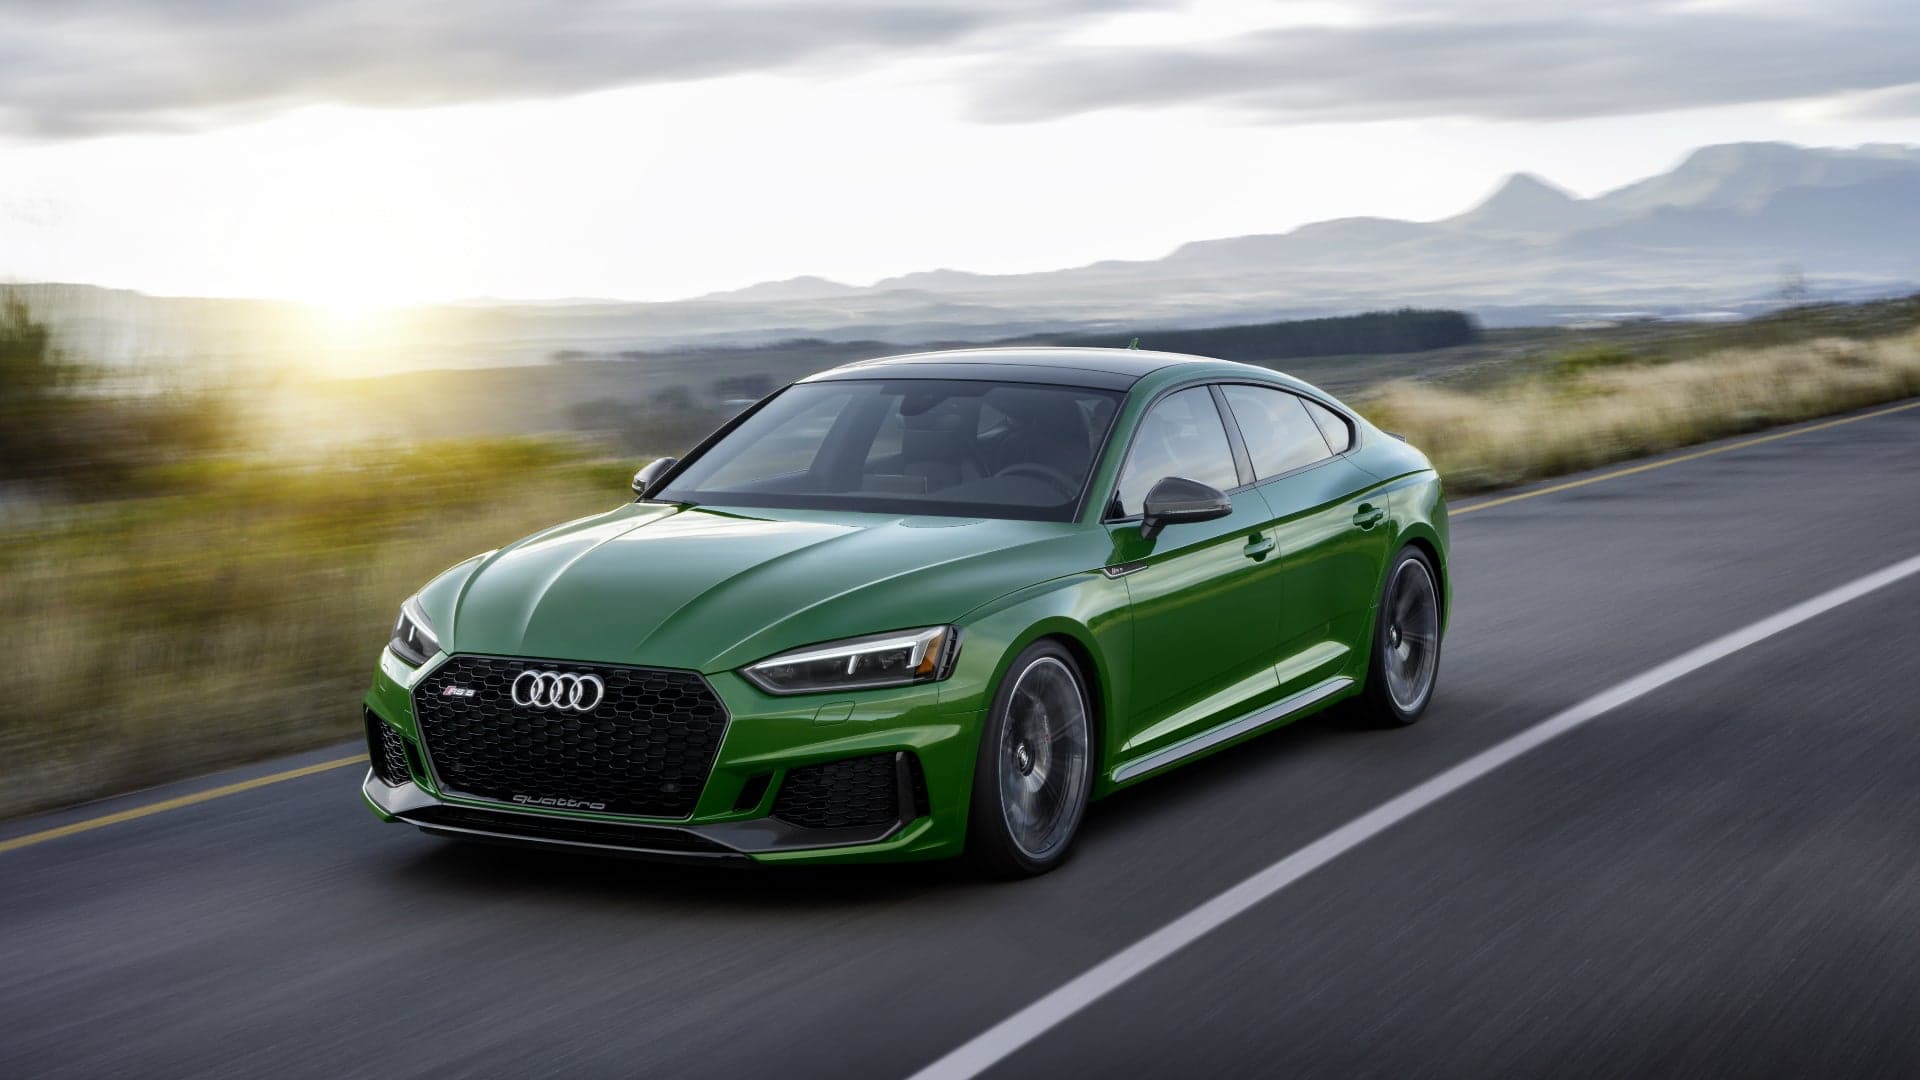 2019 Audi RS 5 Sportback Unveiled at the New York Auto Show